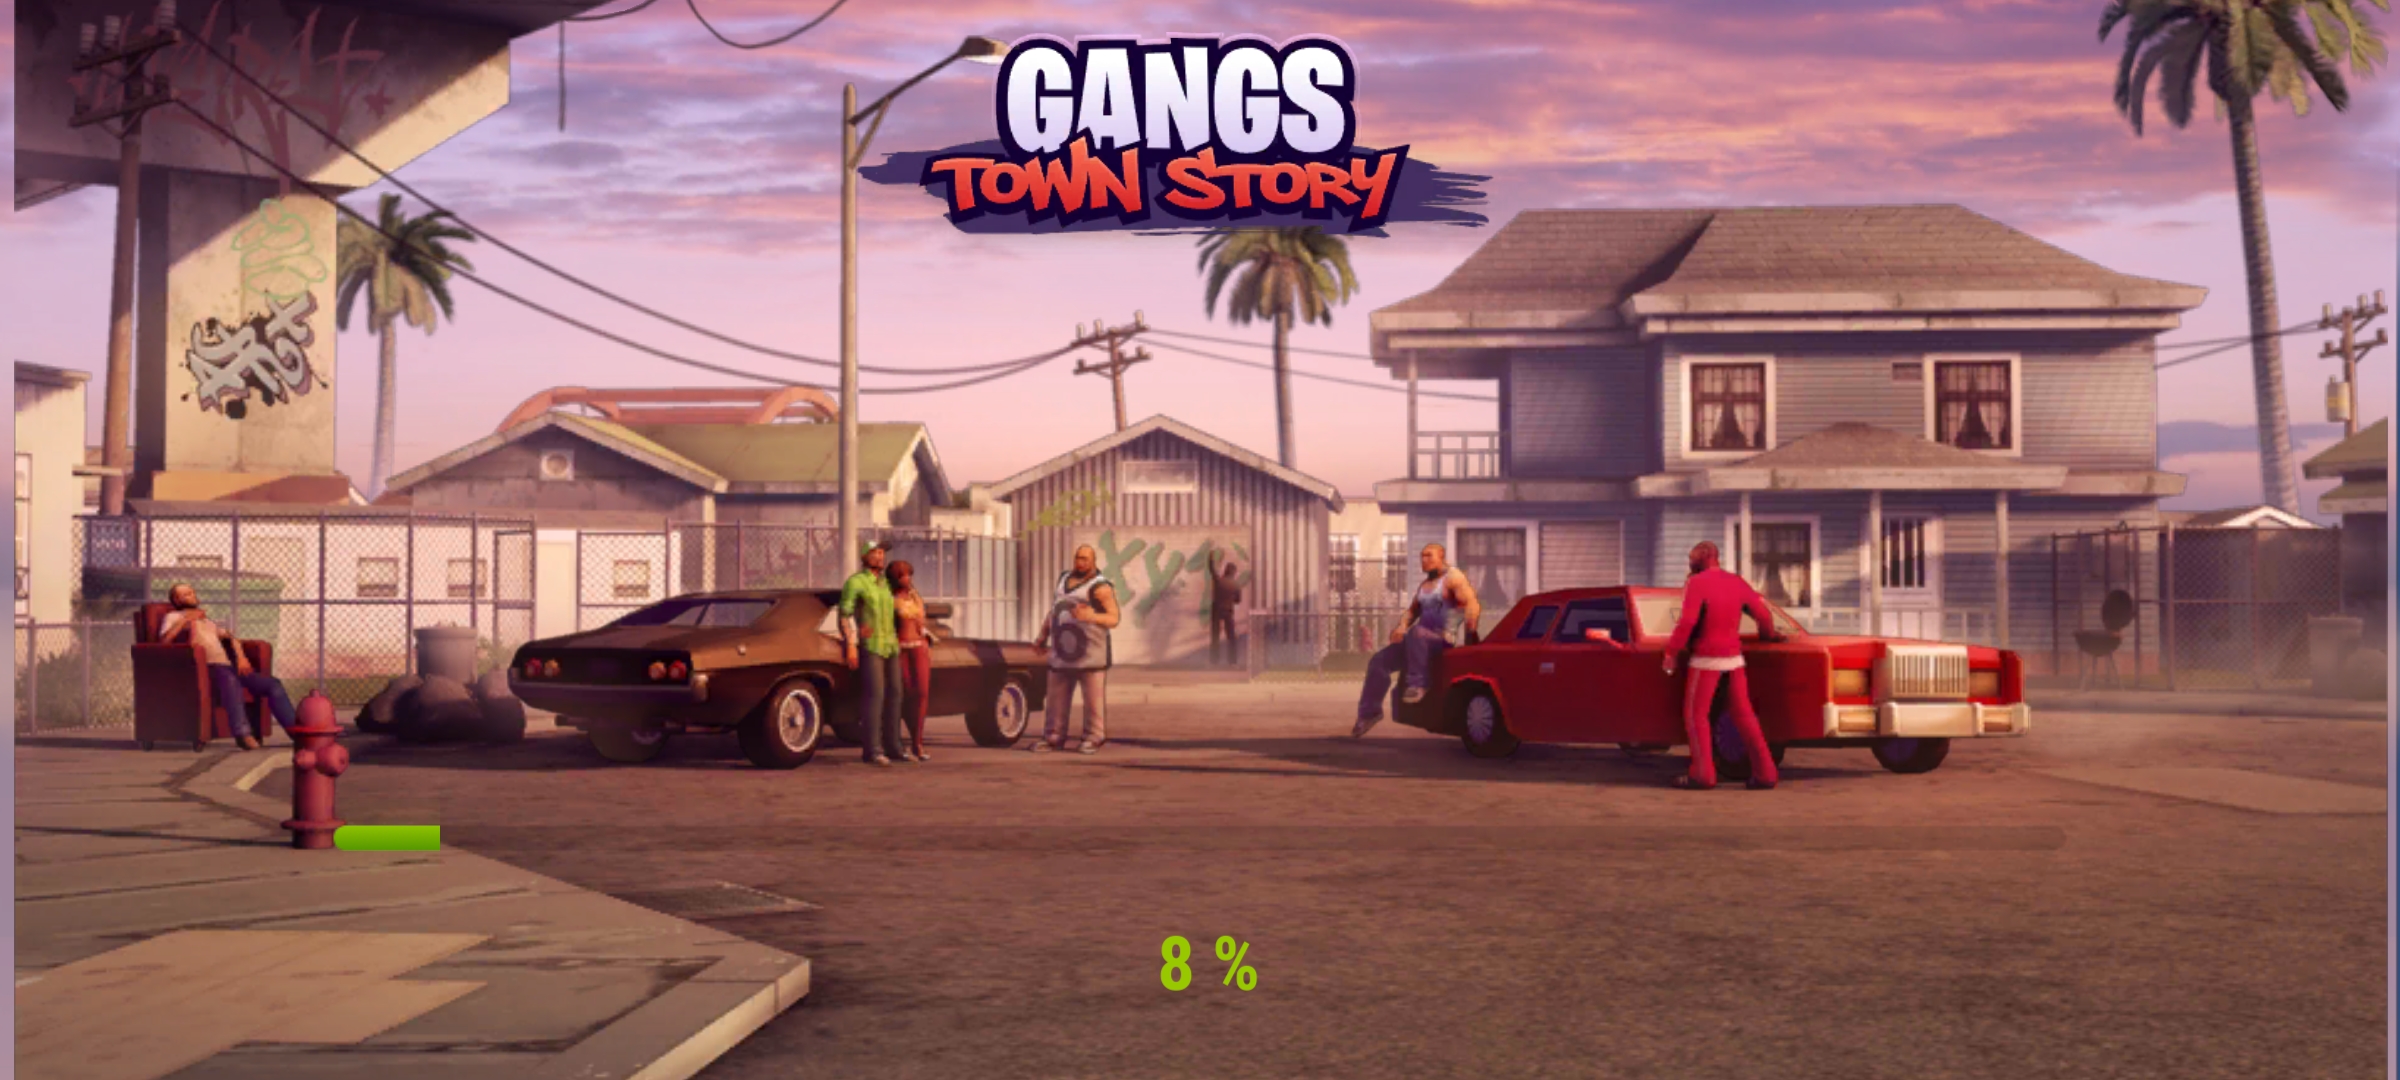 [Game Android] Gangs Town Story